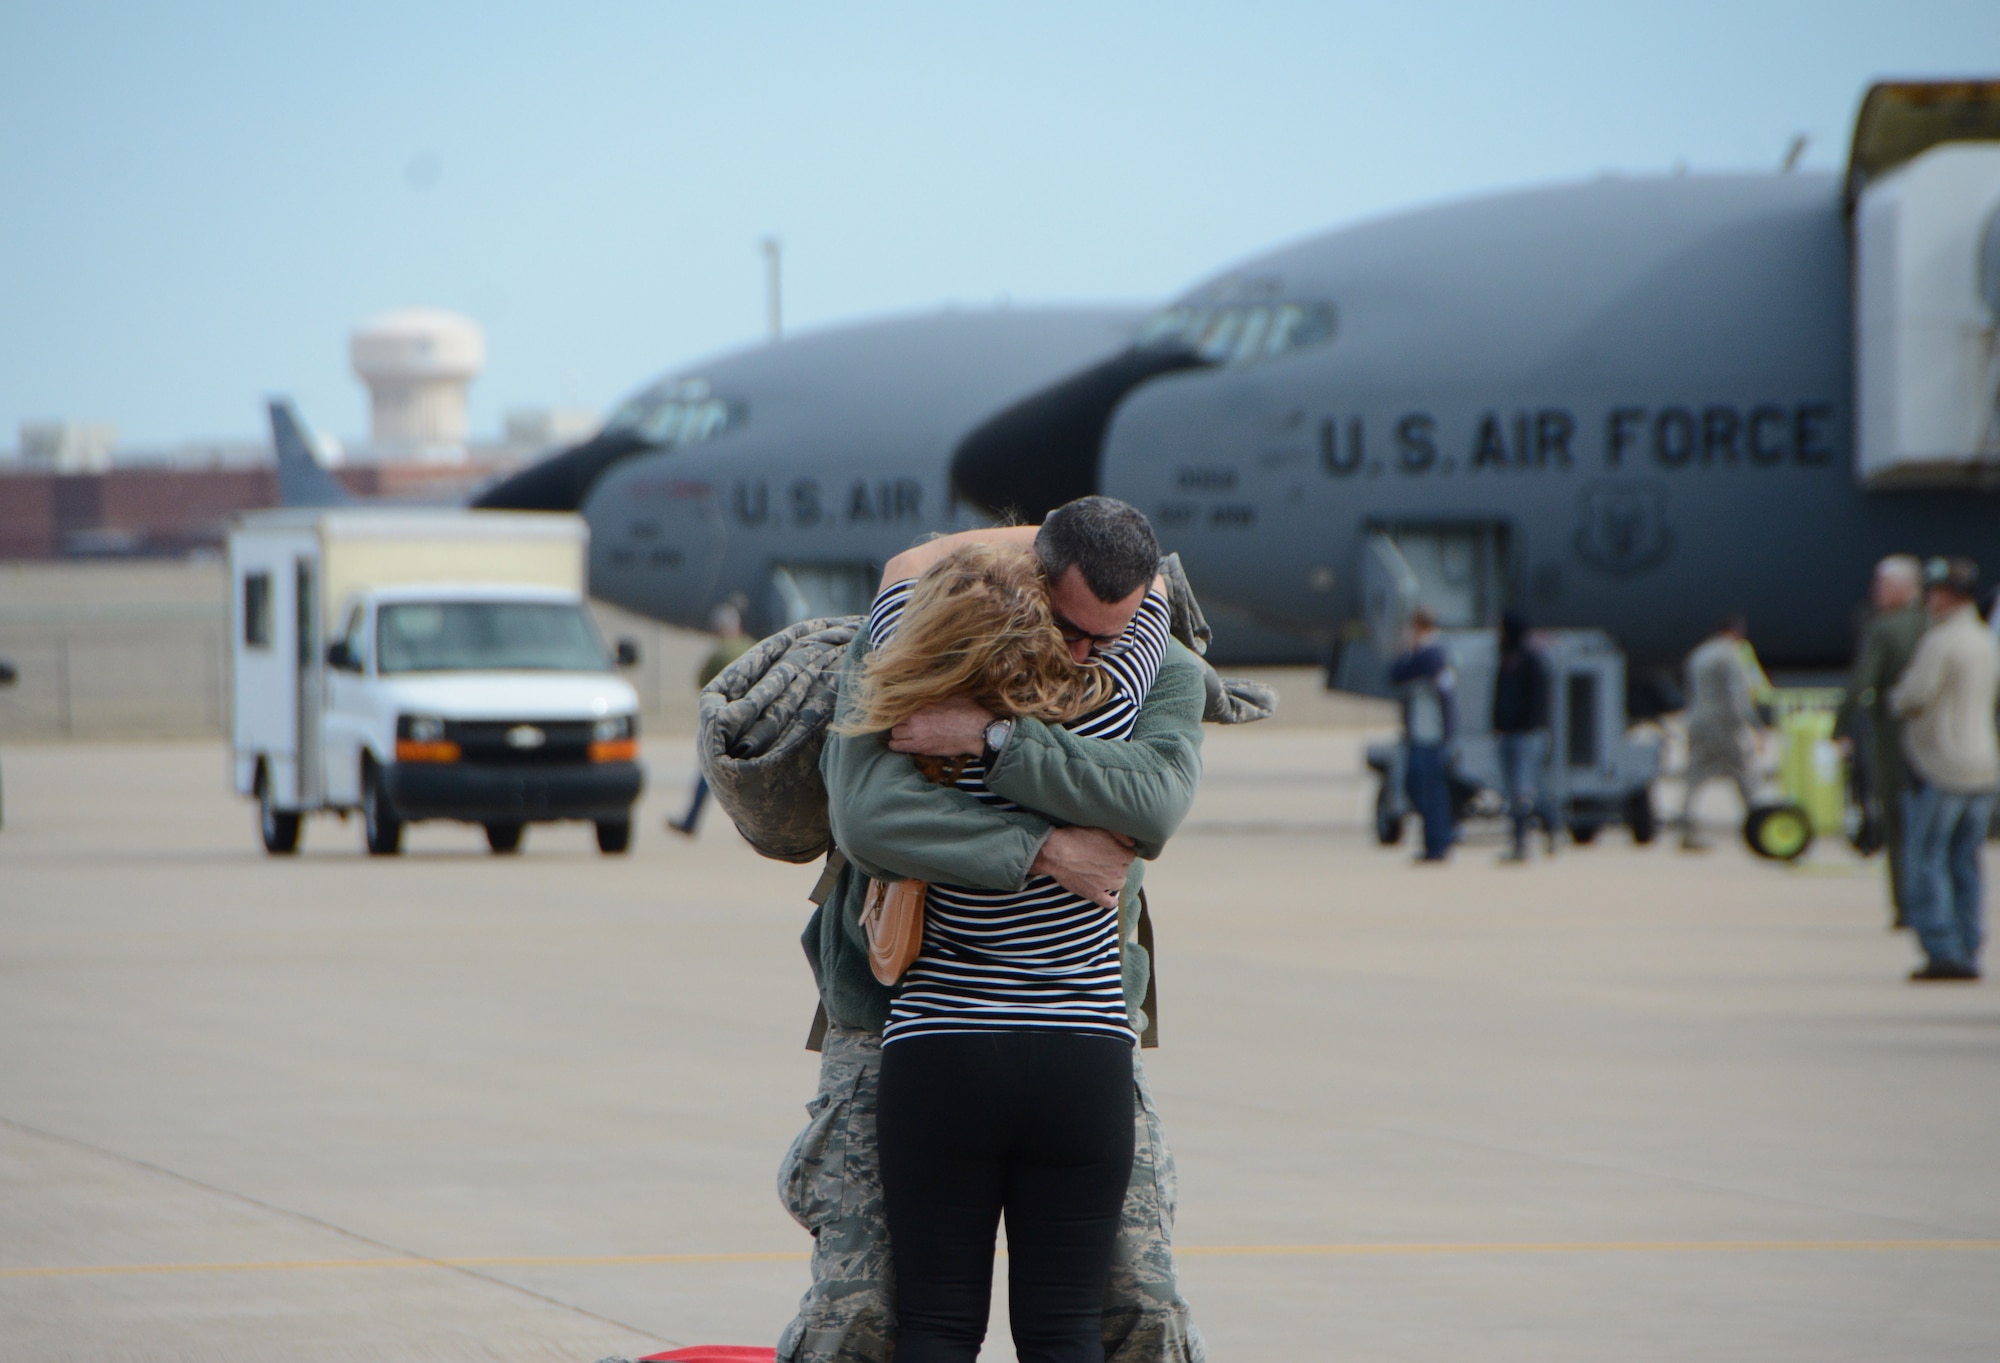 Staff Sgt. Tim Hardy of the 507th Aircraft Maintenance Squadron hugs his wife following a deployment Feb. 17, 2017, at Tinker Air Force Base, Okla. More than 90 Reservists deployed in December 2016 in support of air operations at Incirlik Air Base, Turkey, against the Islamic State group. (U.S. Air Force photo/Tech. Sgt. Lauren Gleason)